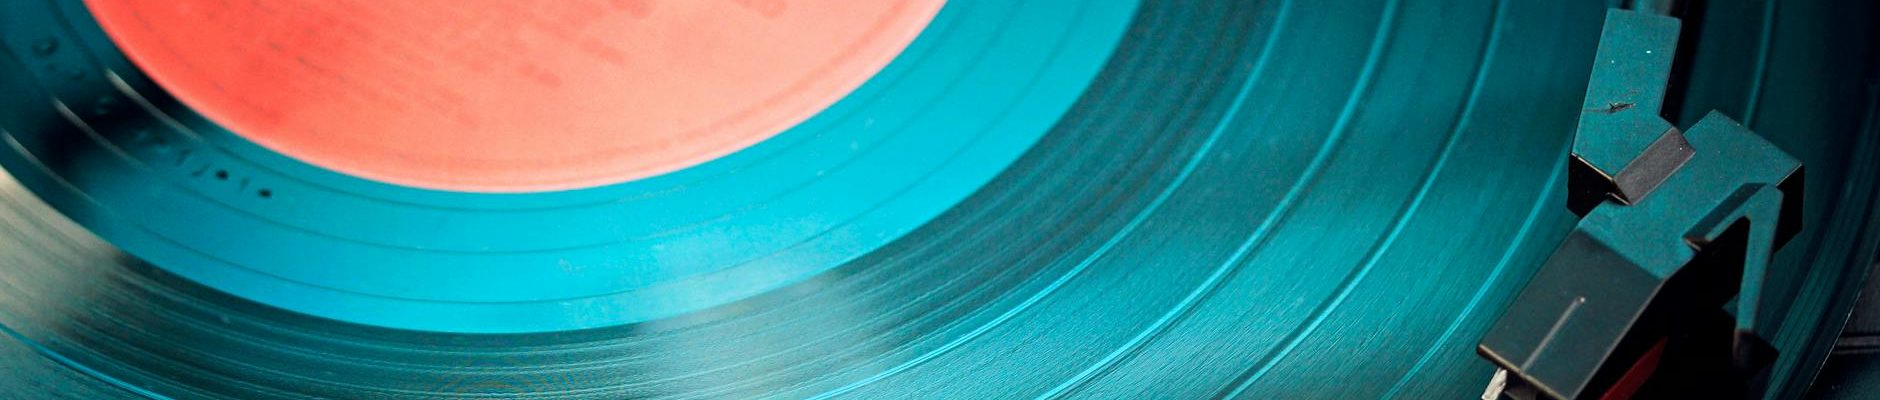 blue vinyl record playing on turntable